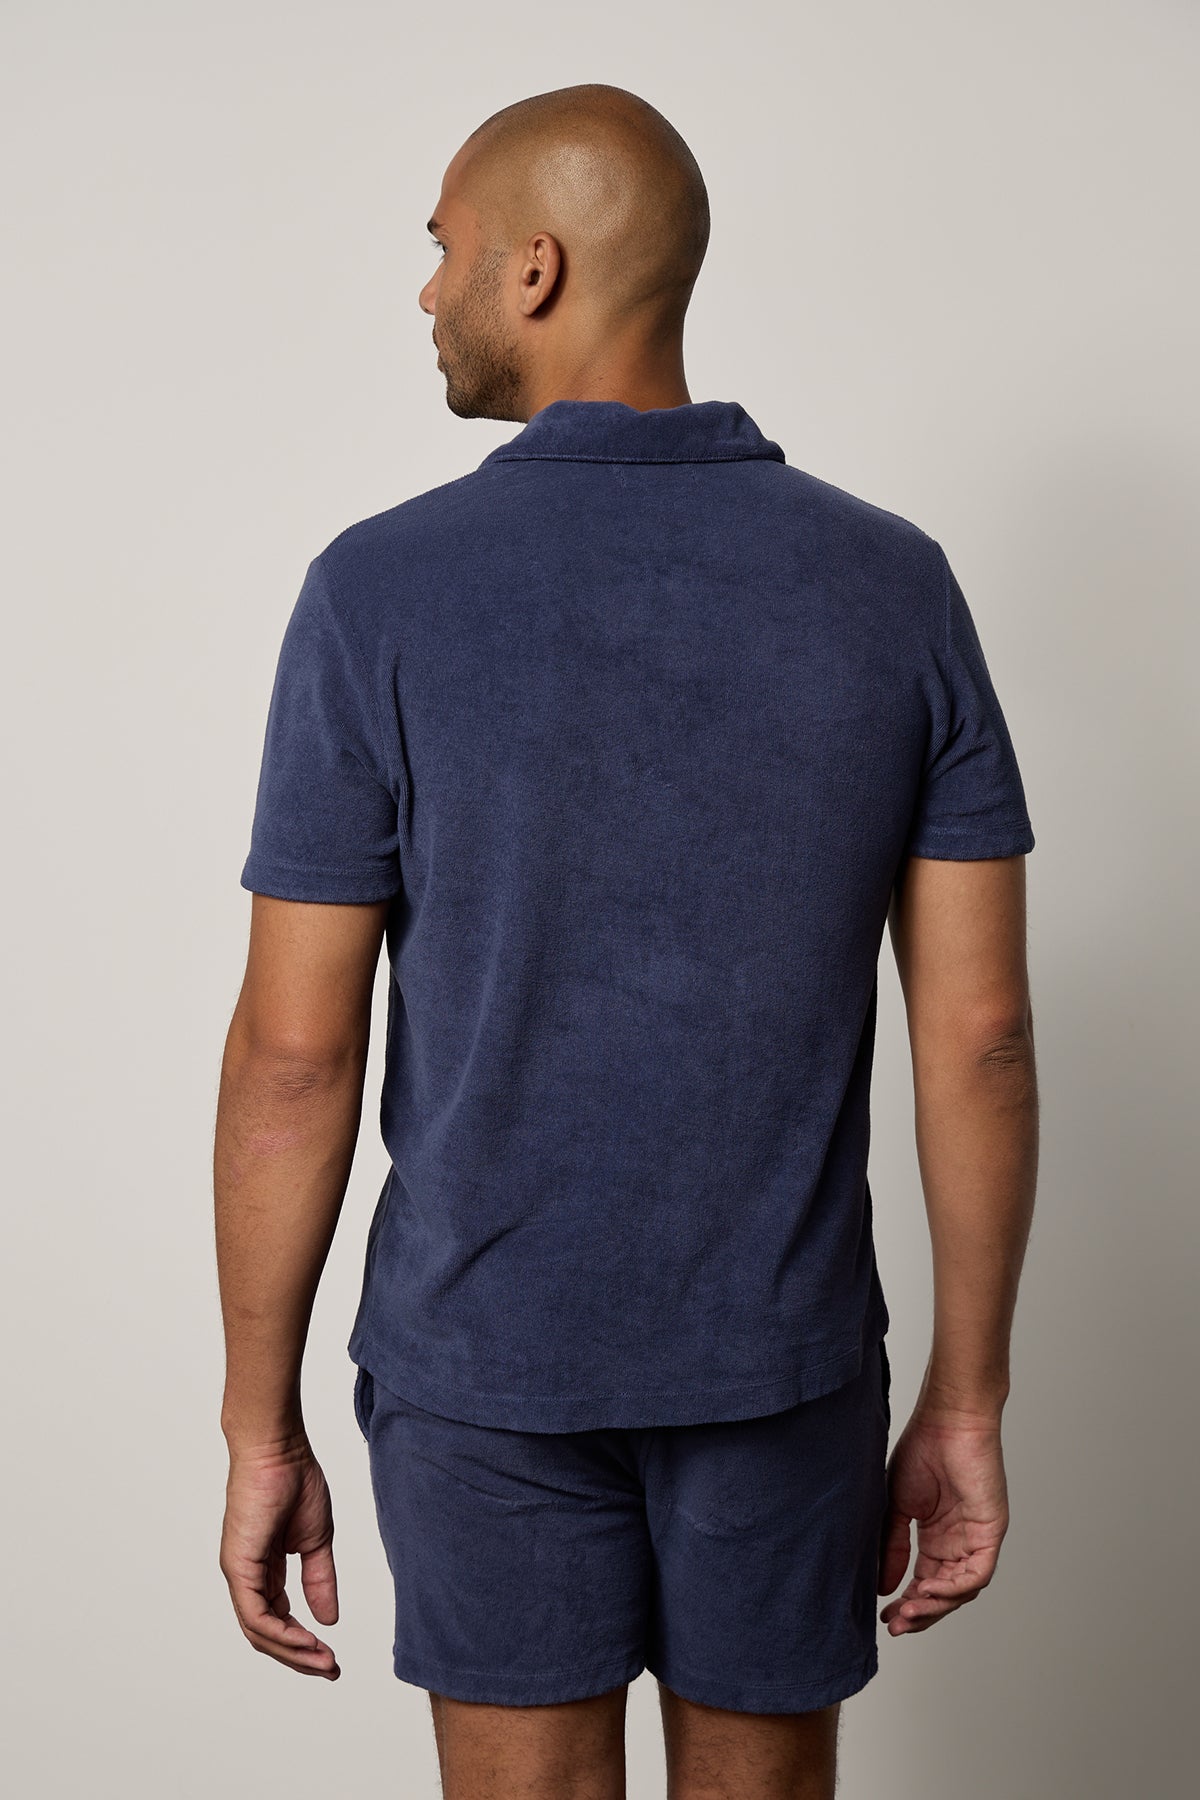 the back view of a man wearing Velvet by Graham & Spencer's BORIS TERRY POLO and shorts.-26266324533441